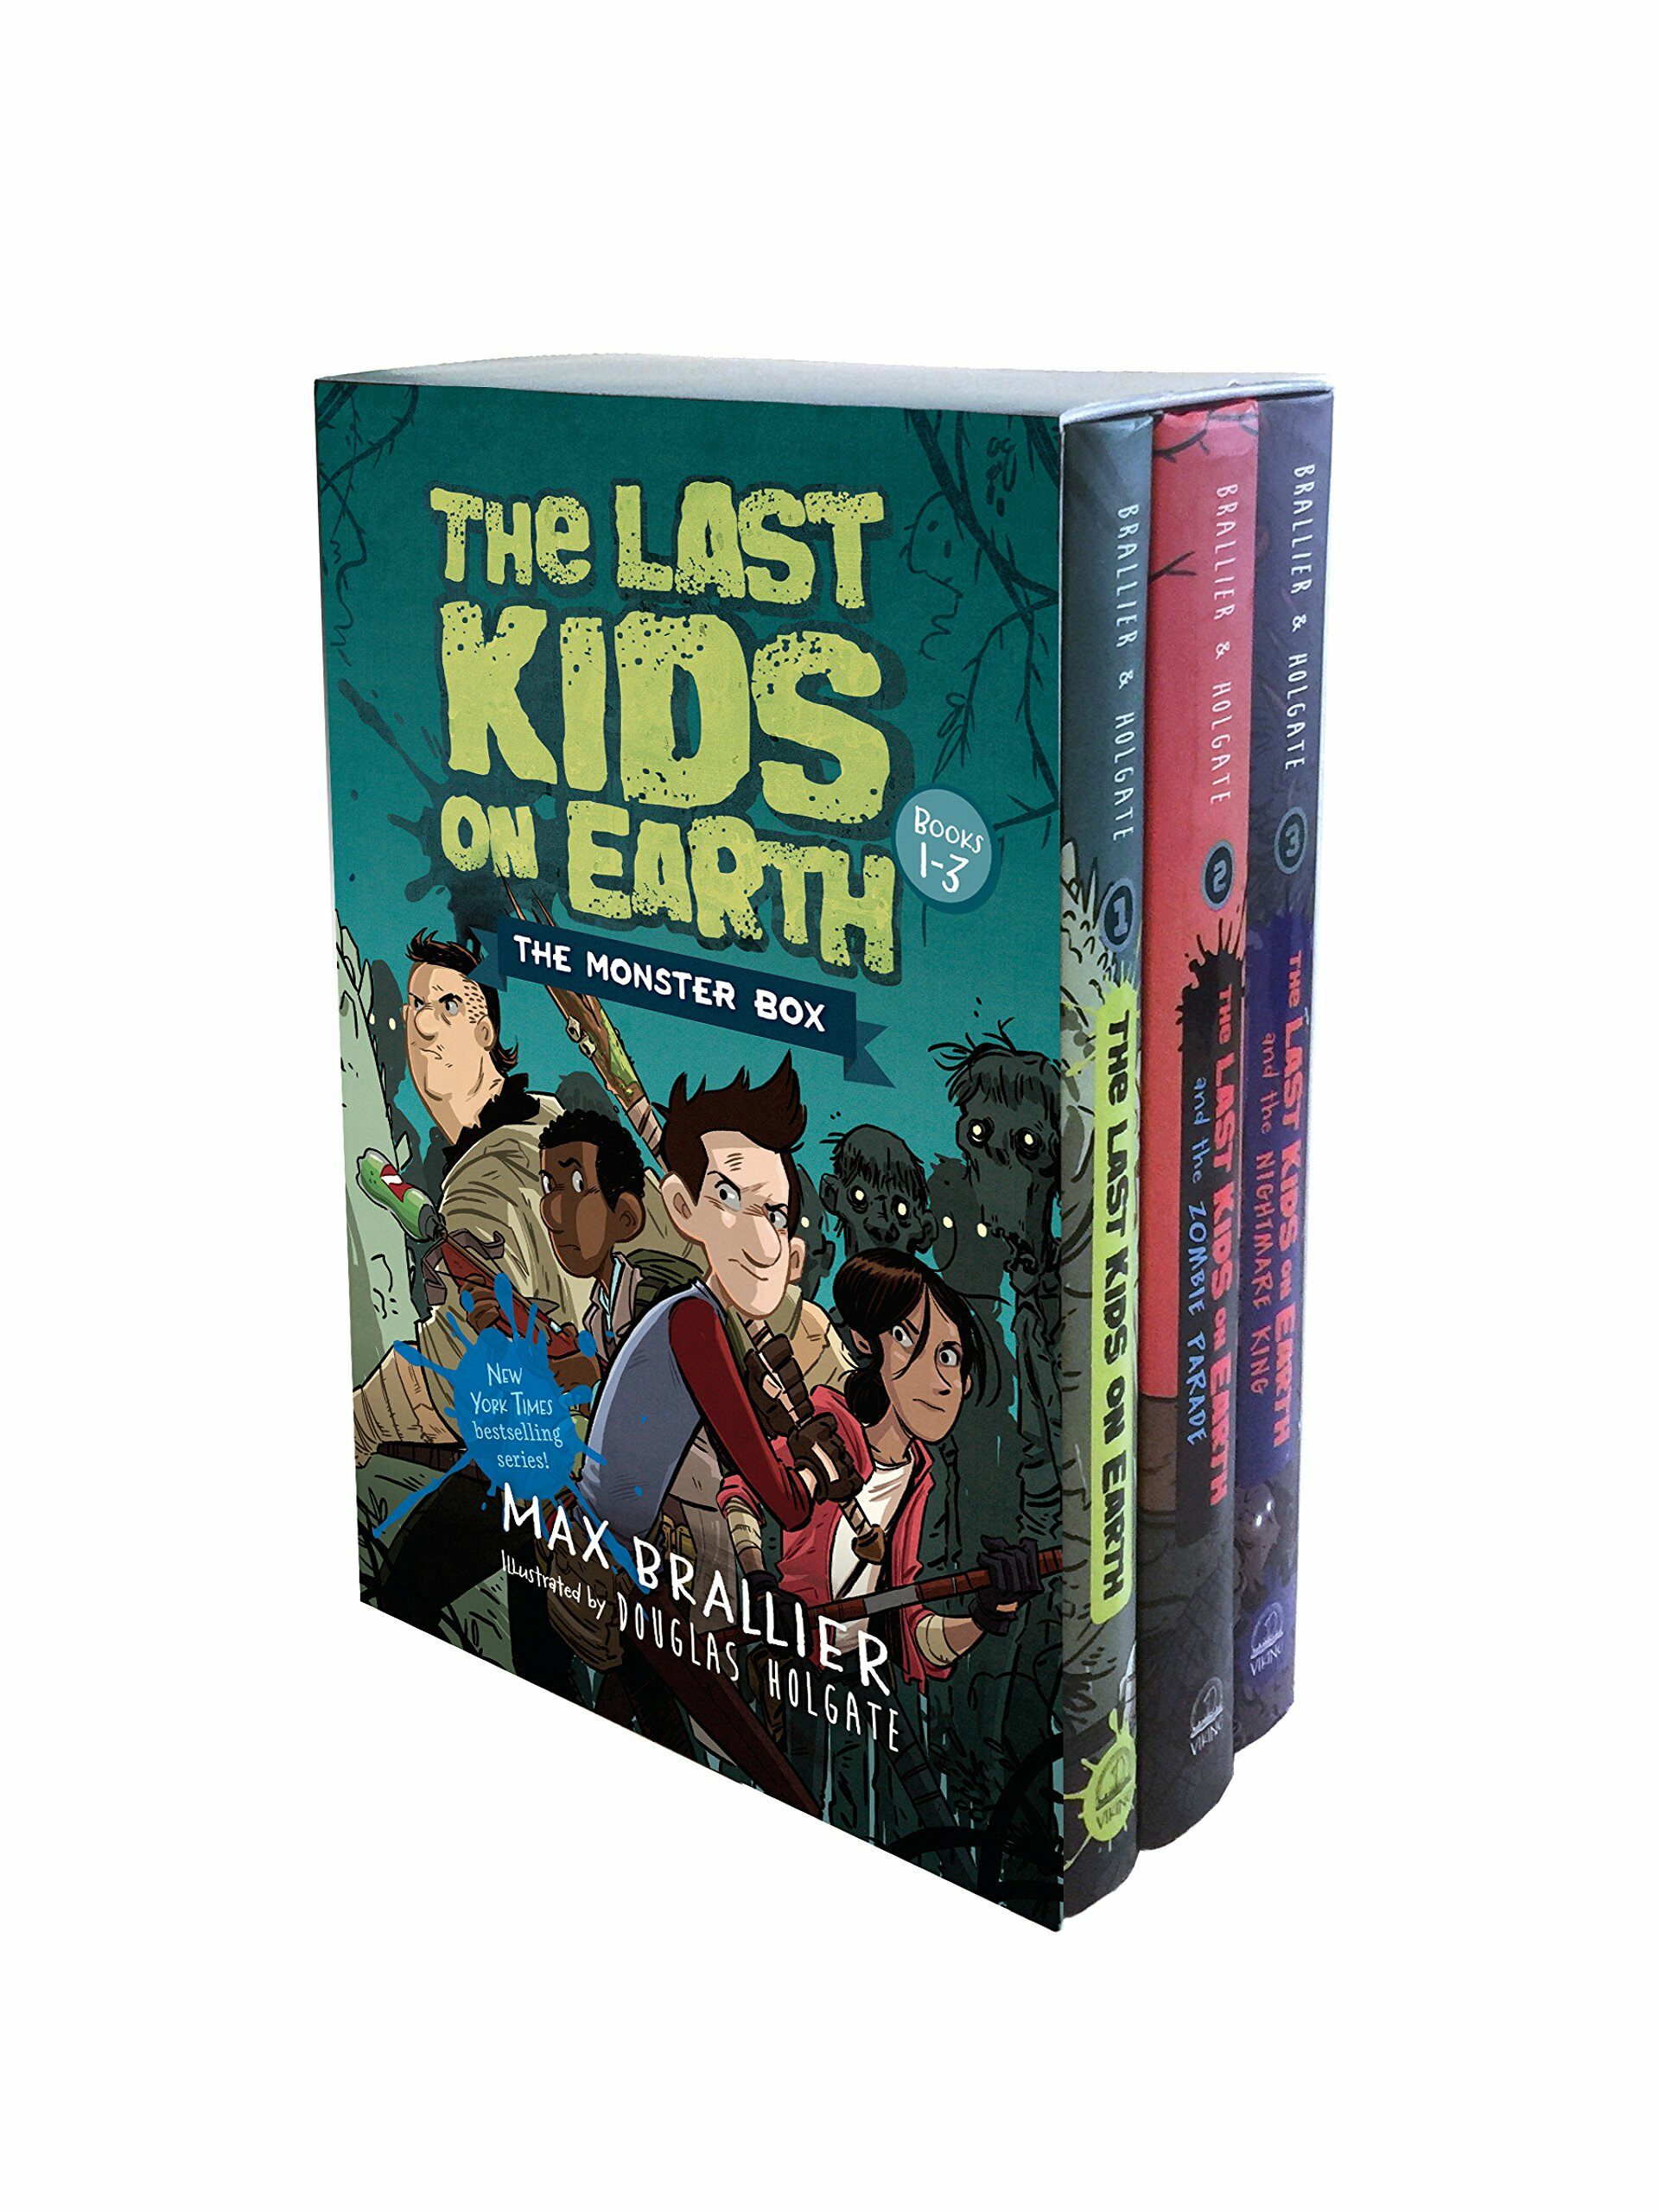 The Last Kids on Earth: The Monster Box (Books 1-3) (Hardcover)